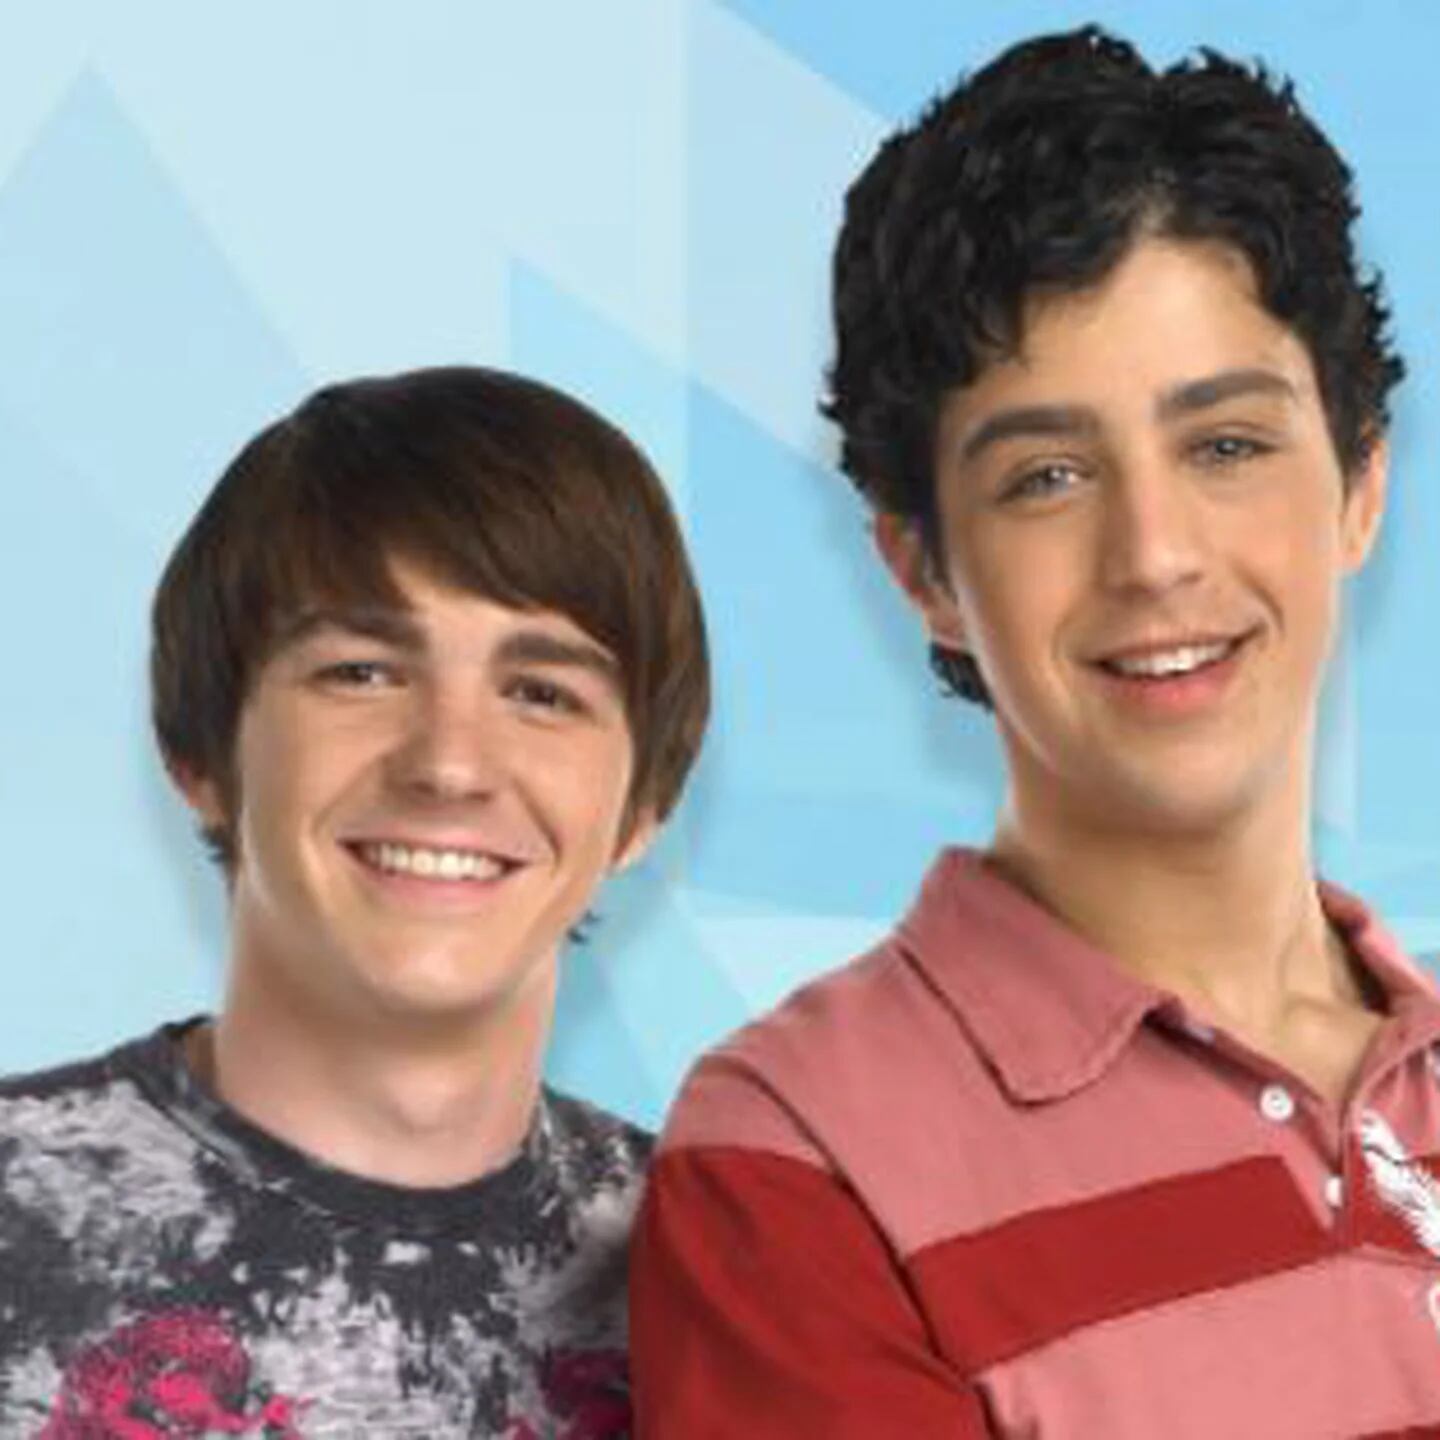 A 'Drake & Josh' reboot is in the works, Drake Bell says